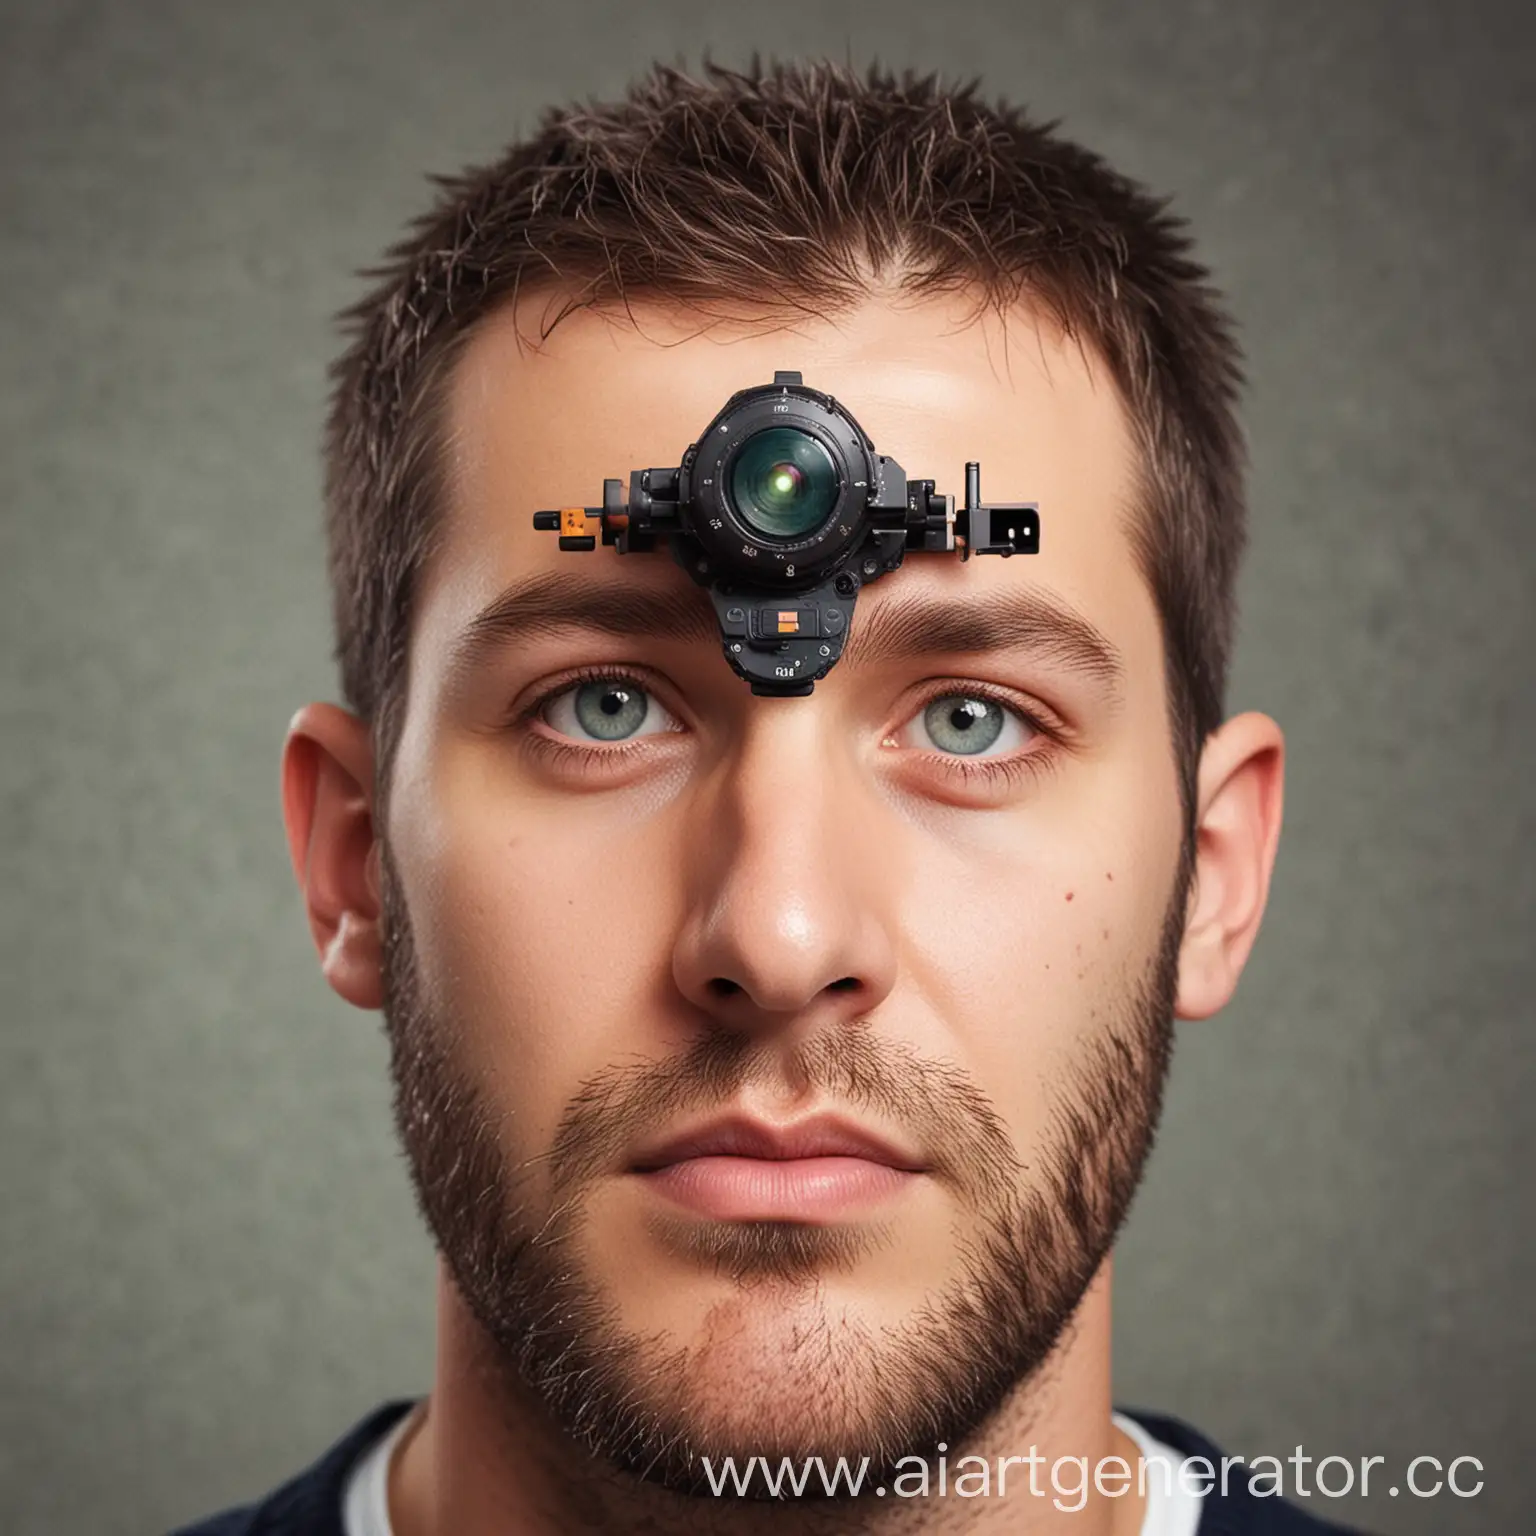 Man-with-Sight-on-Head-Surreal-Portrait-Concept-Art